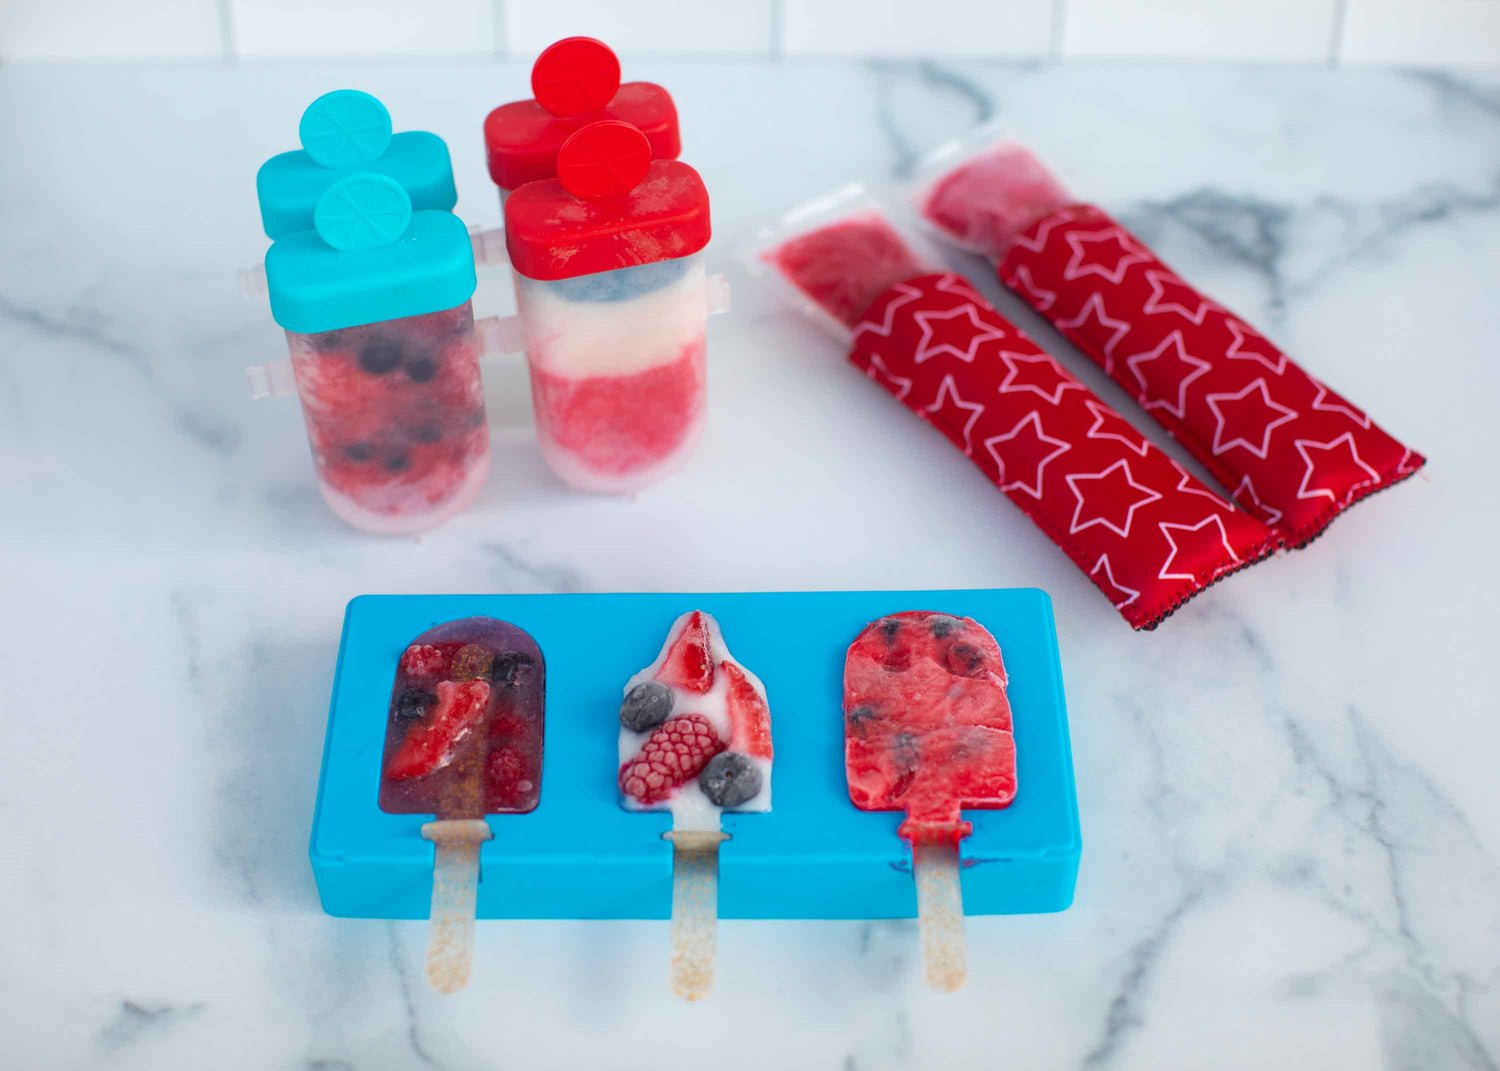 Lifestyle image of berry flavored popsicles  using all of the ice pop party molds